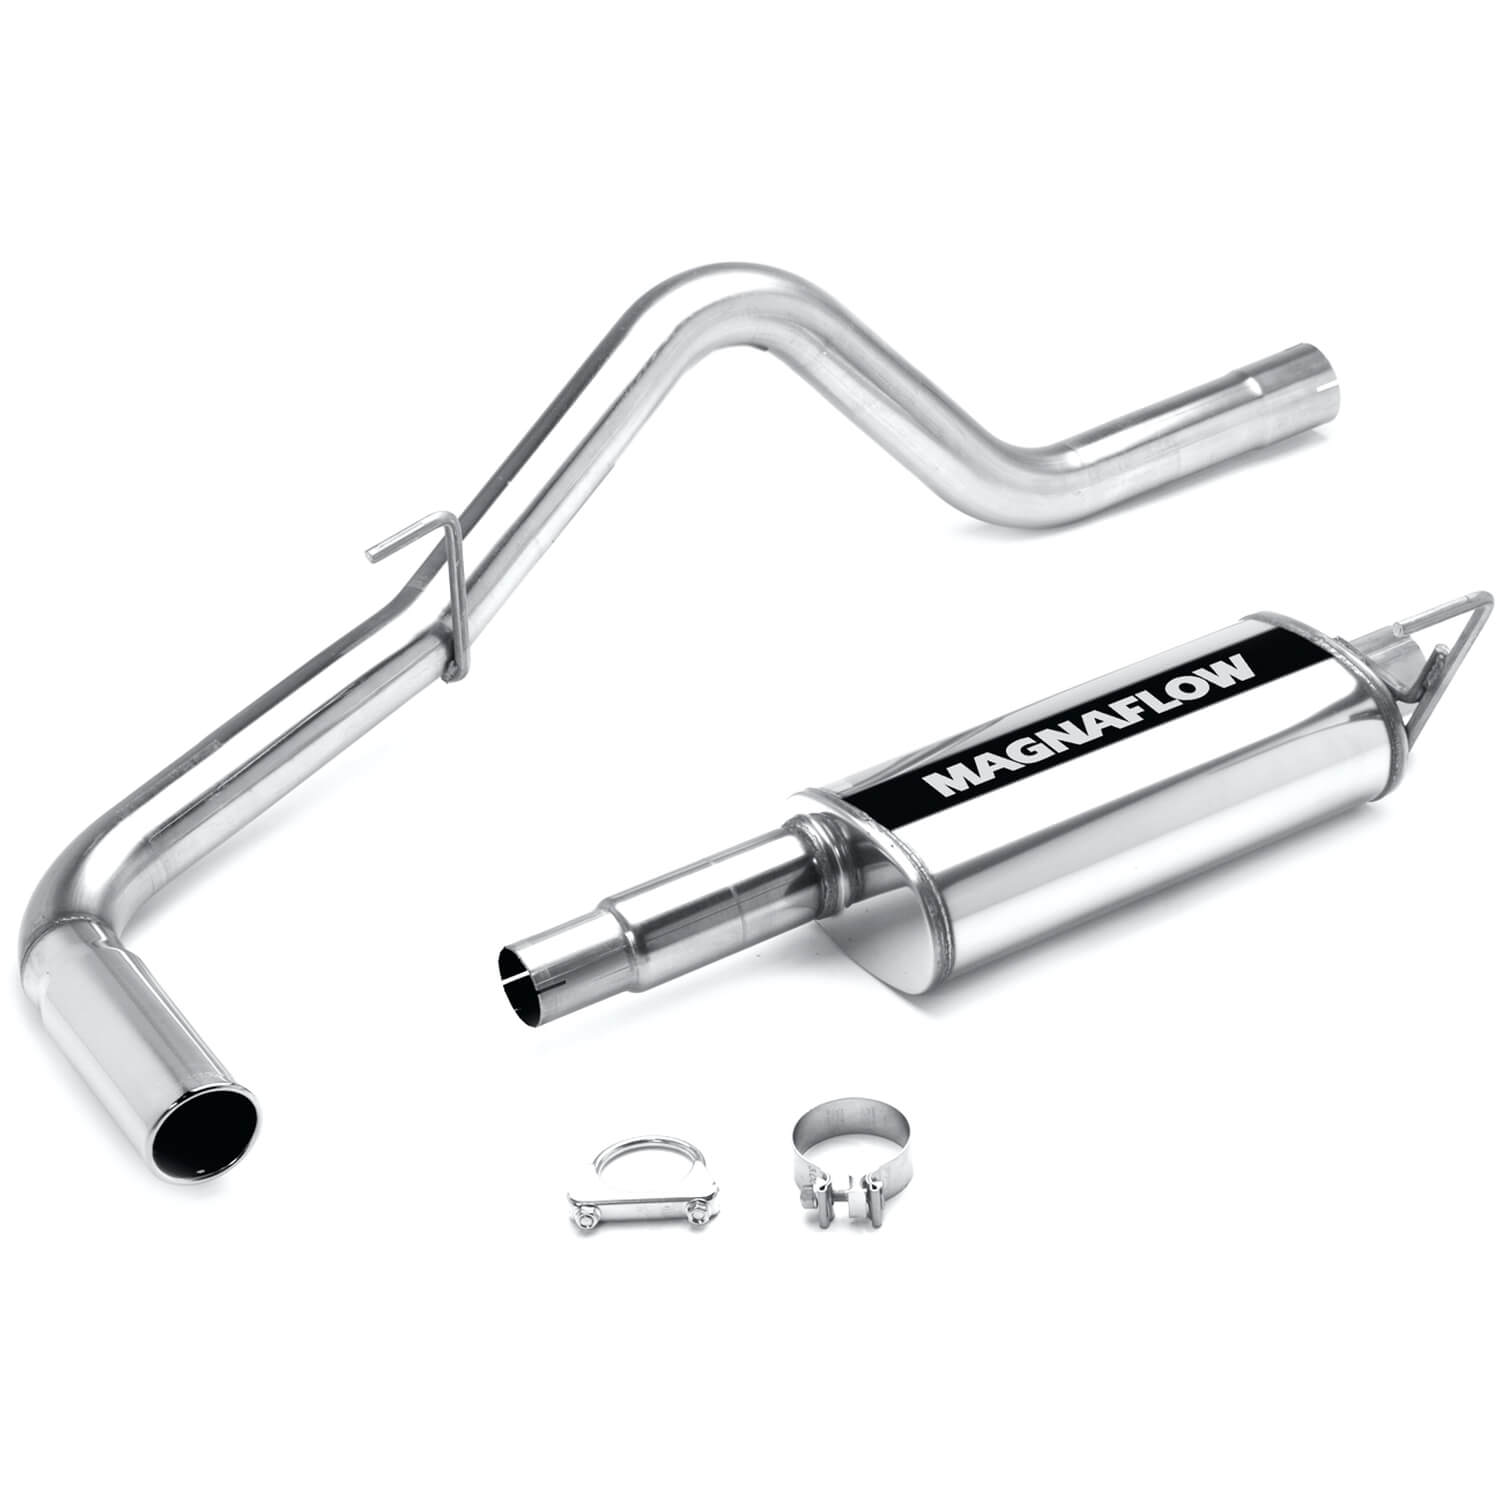 MF Series Cat-Back Exhaust System 2005-2009 Frontier 4.0L (Ext/Crew Cab, Short Bed)